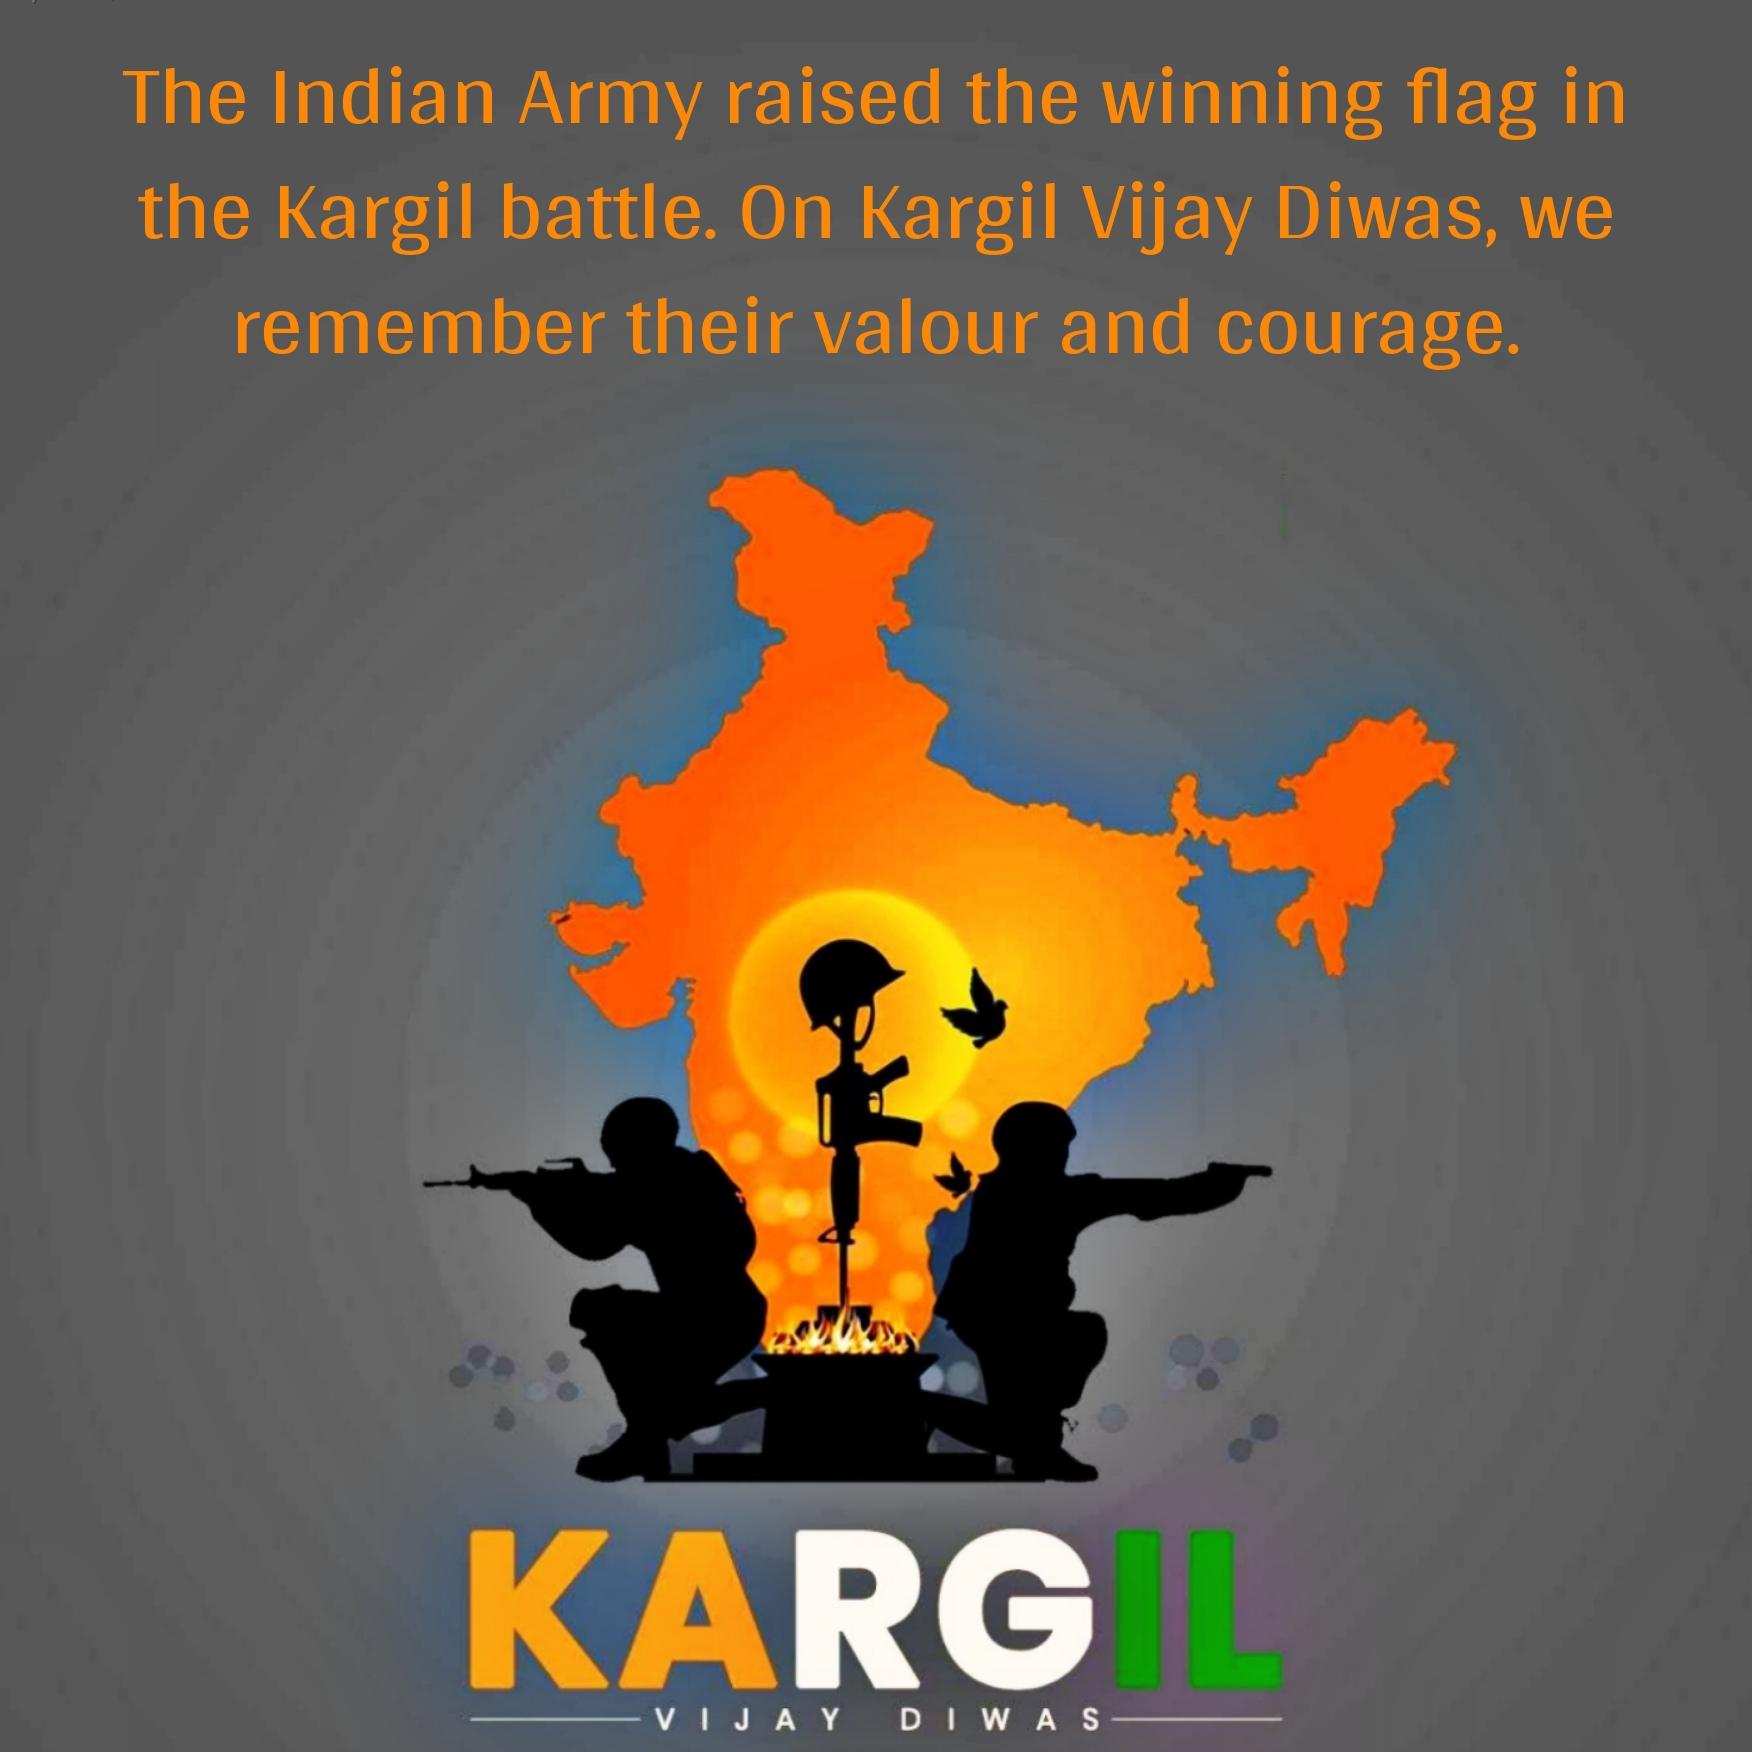 The Indian Army raised the winning flag in the Kargil battle